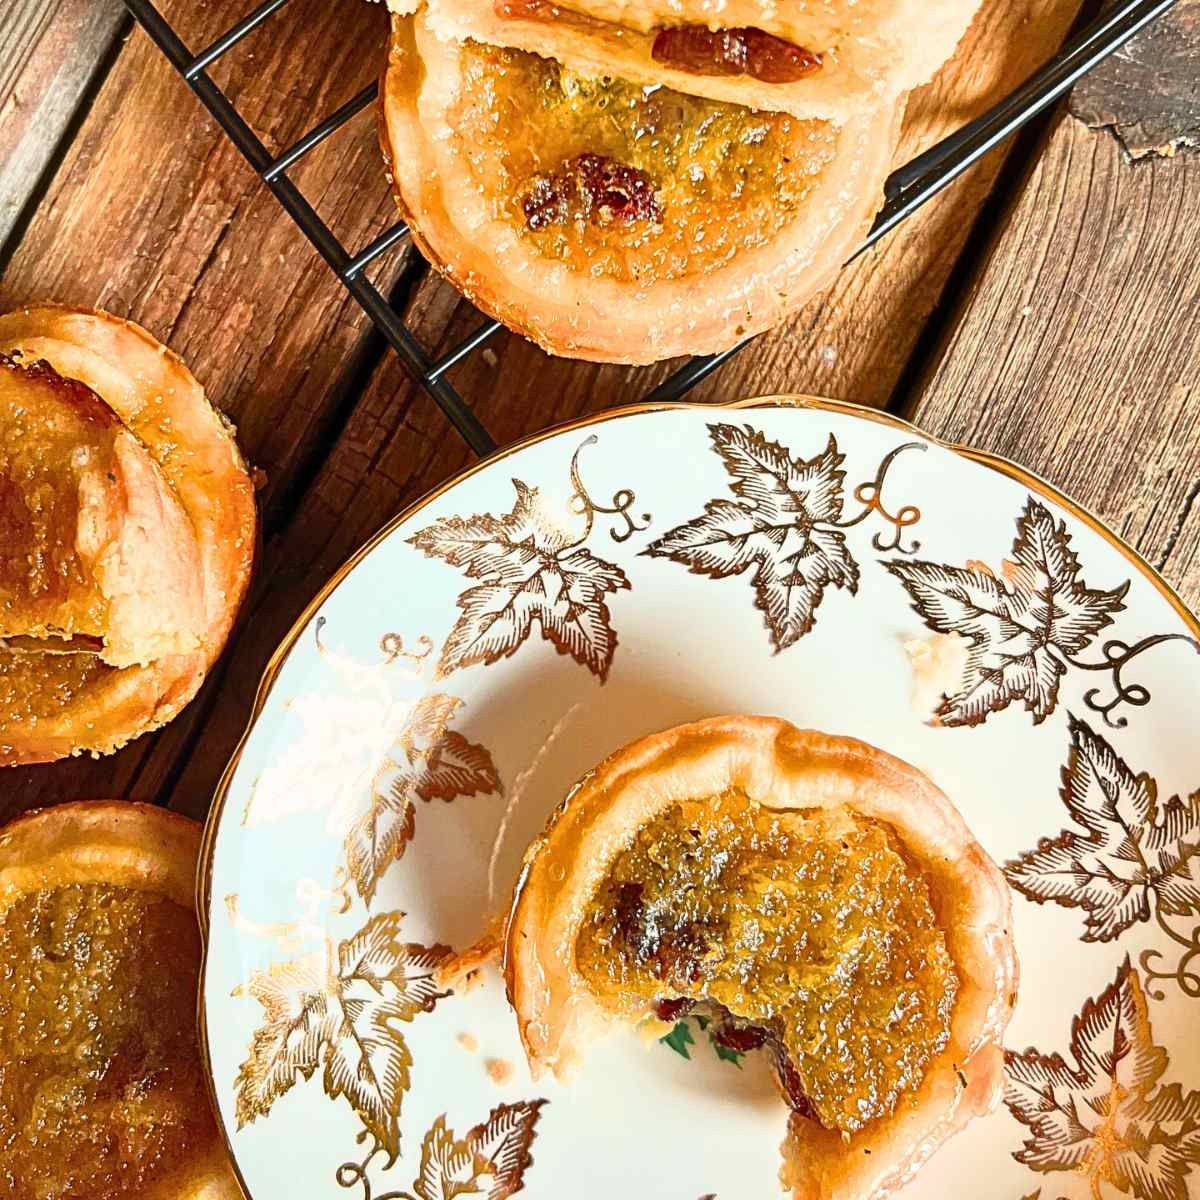 Buttertarts on a wooden table. There is one on a golden maple leaf plate. There is a bite out of it.